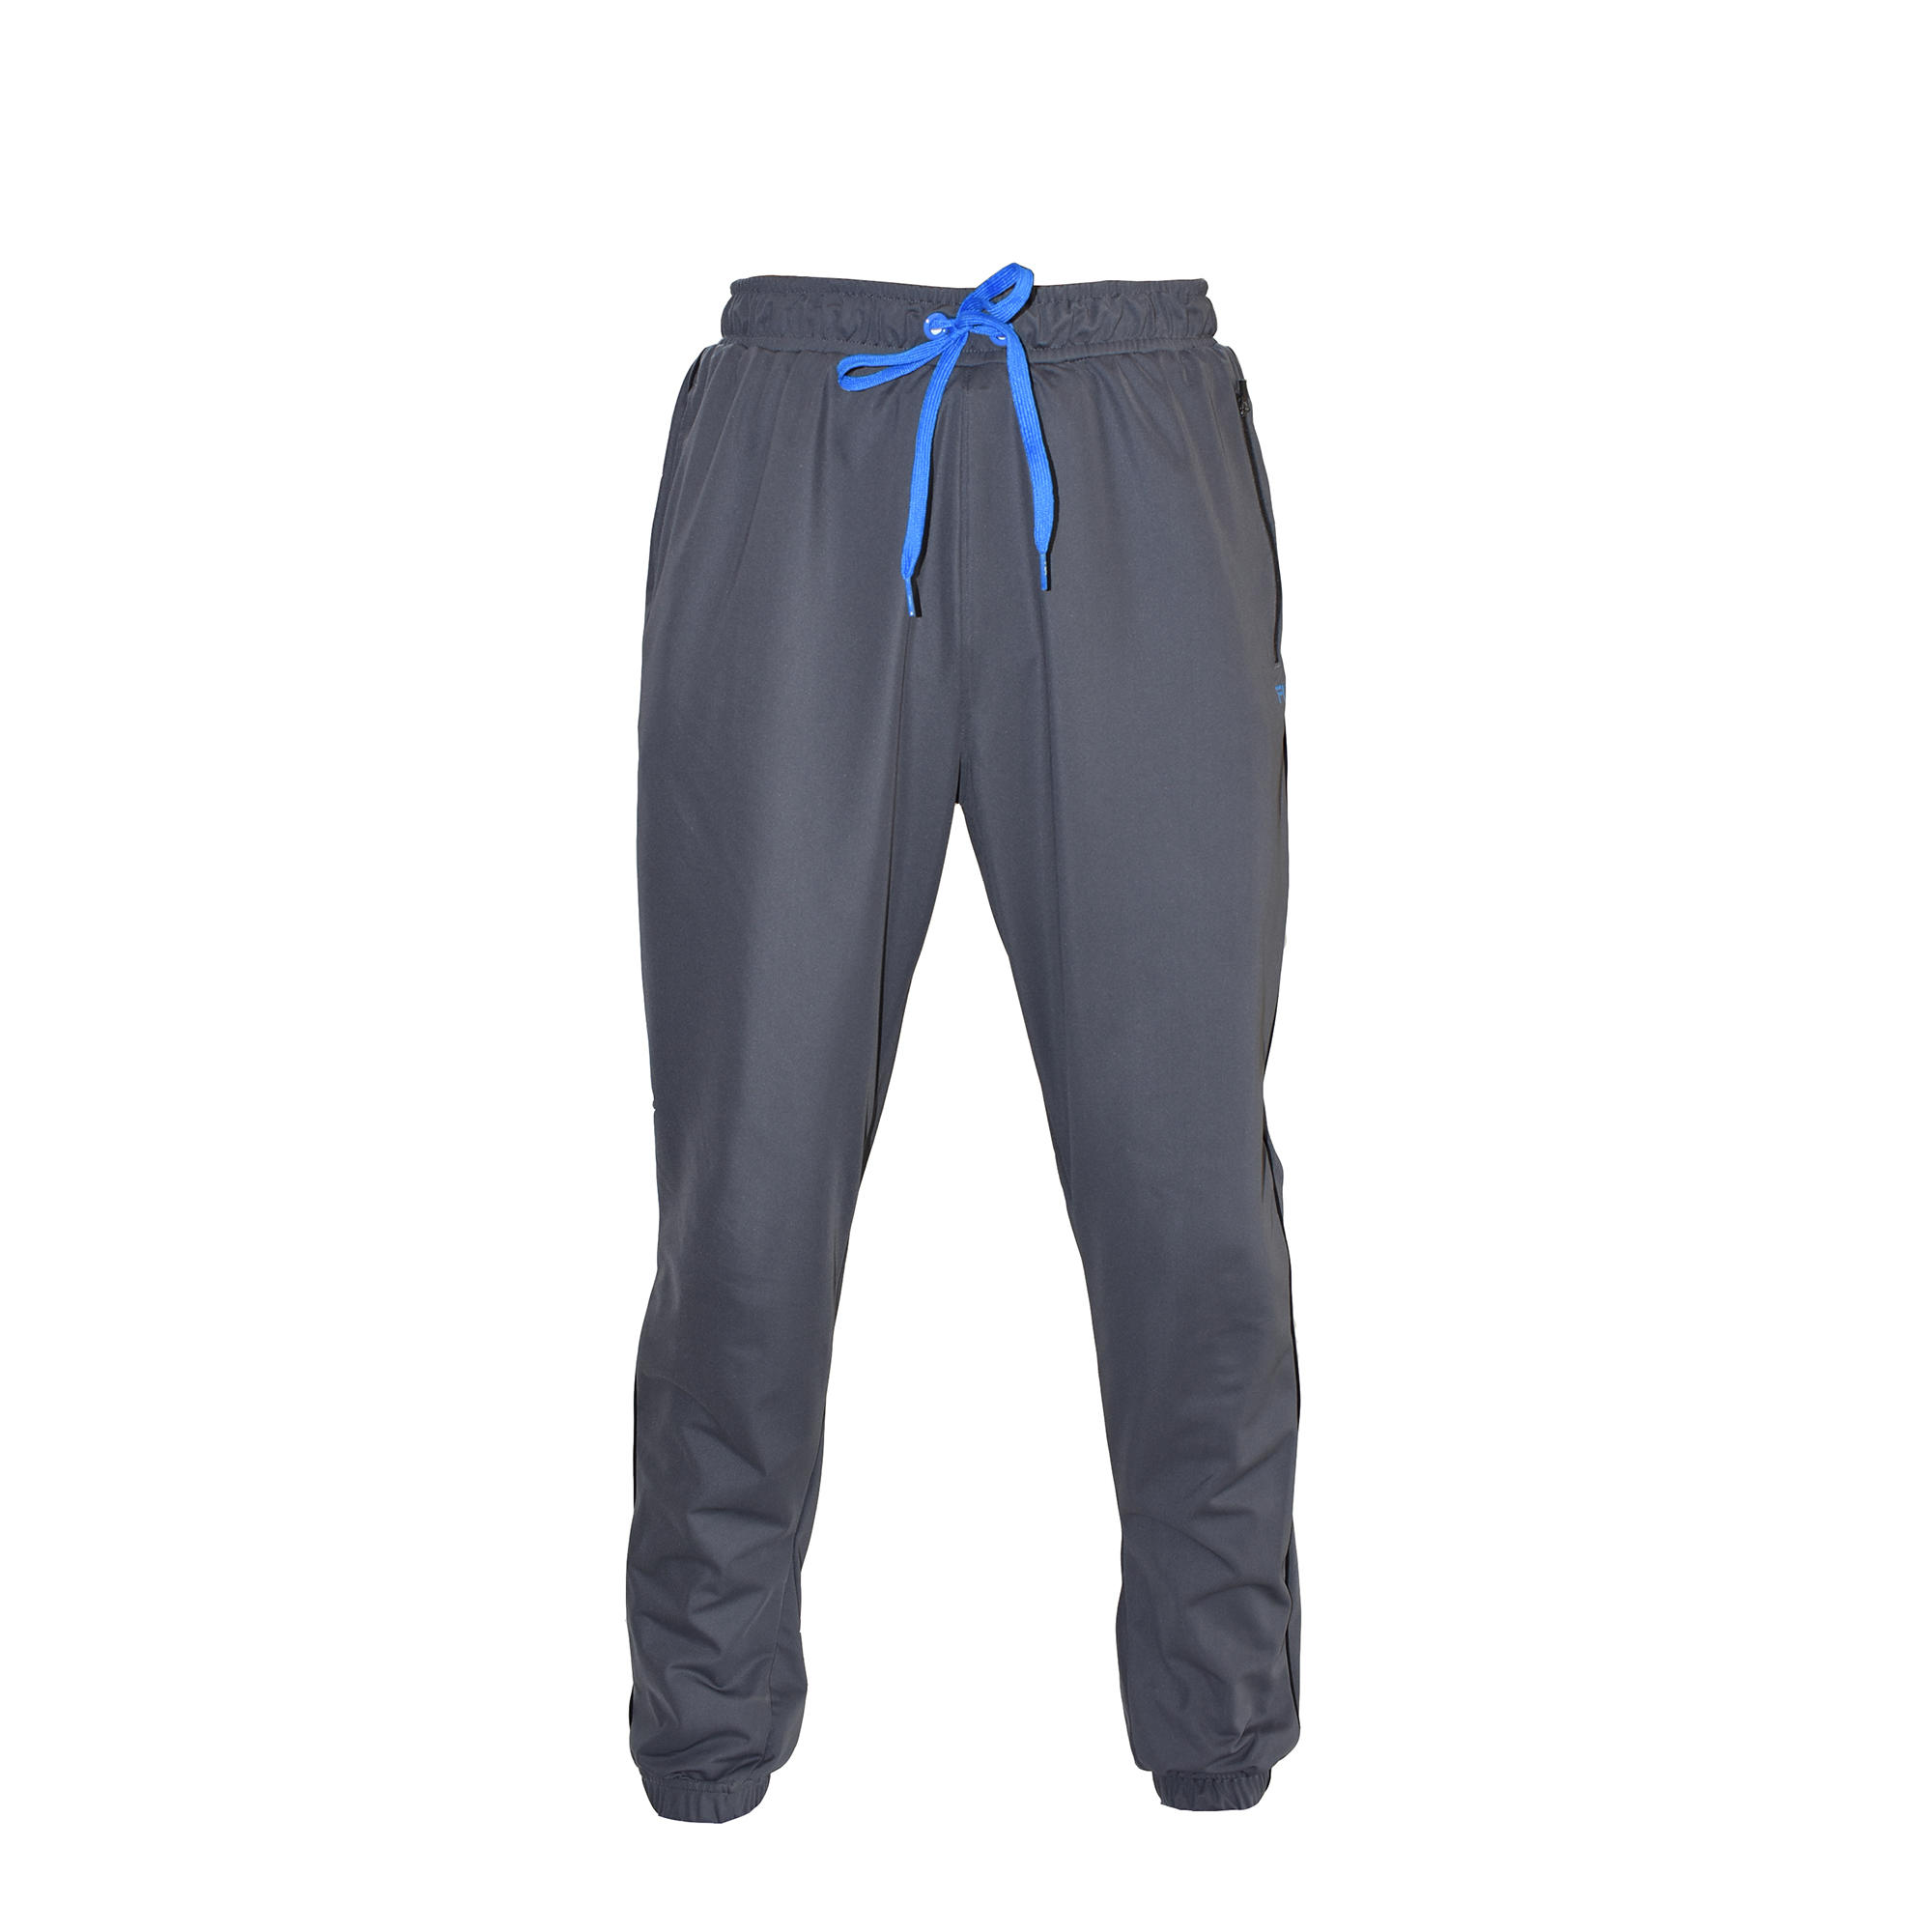 CRICKET TROUSER TAPERED TR 500 - Grey